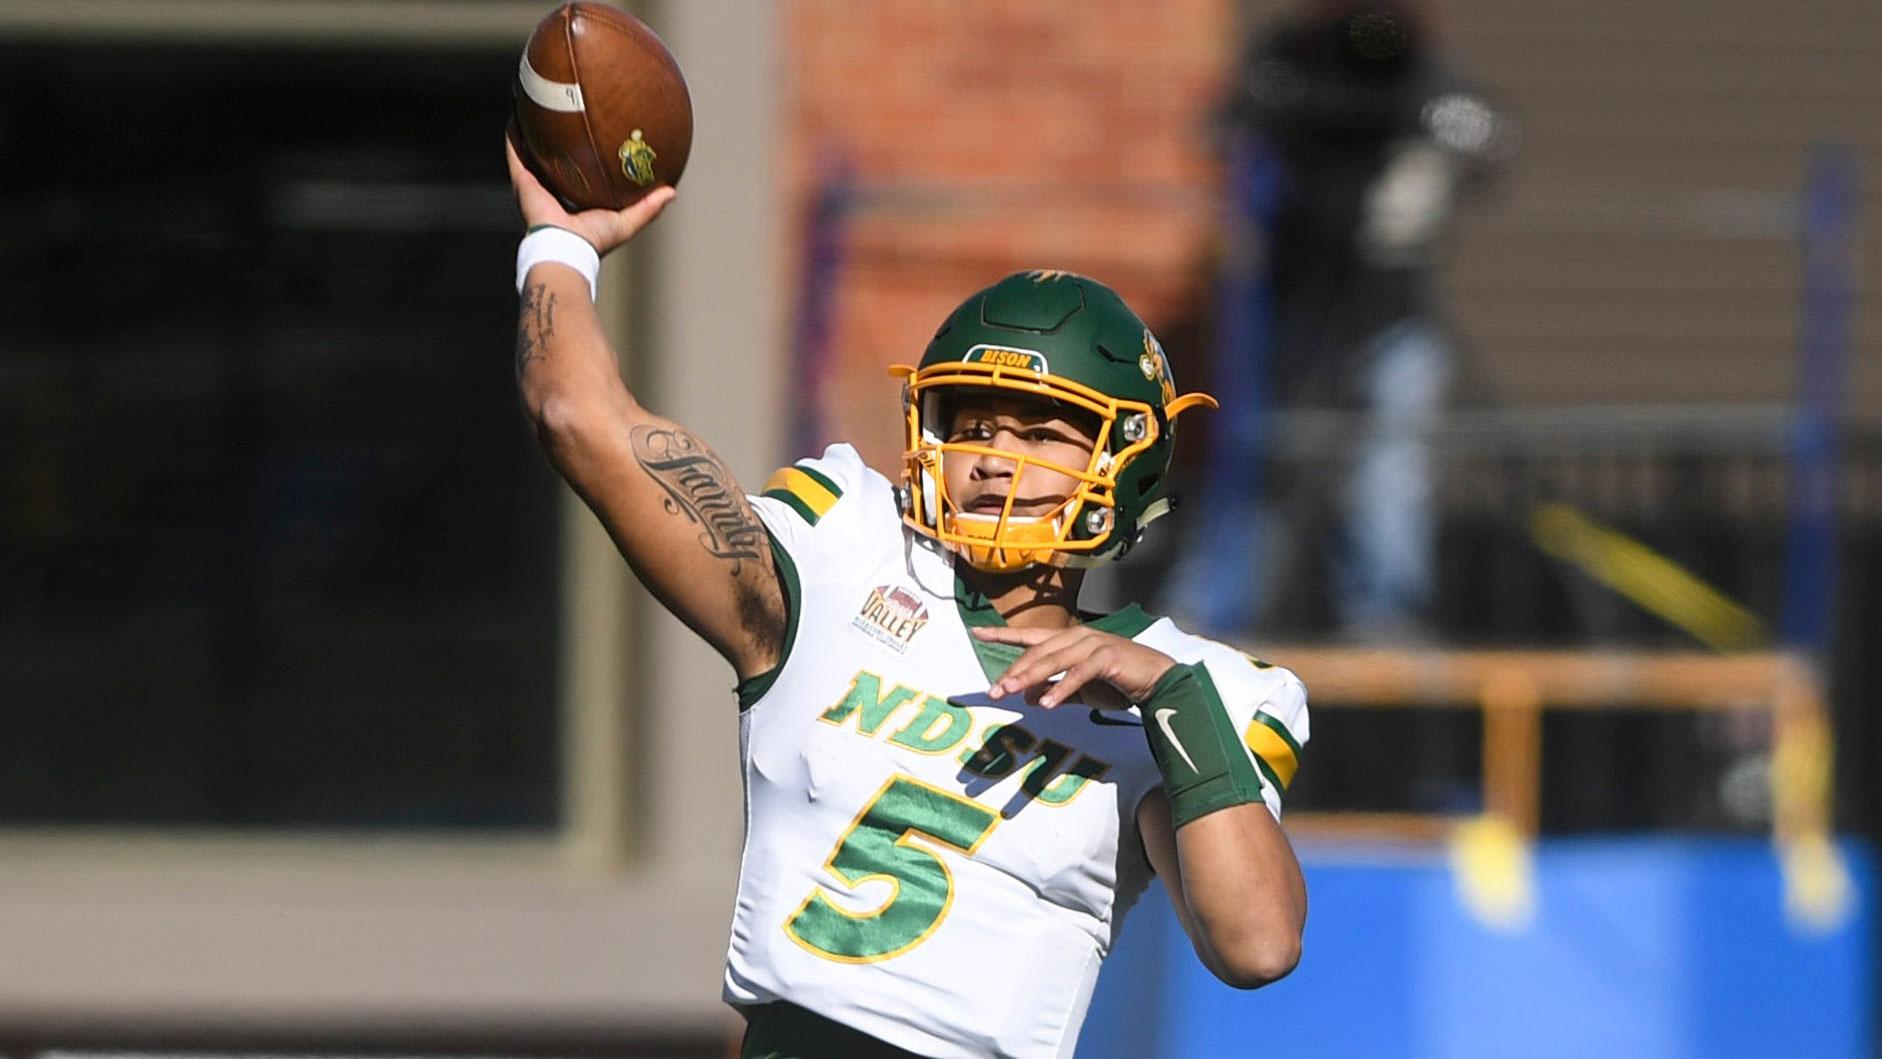 NDSU quarterback Trey Lance (5) prepares to make a pass in the Dakota Marker game against the Jacks on Saturday, Oct. 26, 2019 at Dana J. Dykhouse Stadium in Brookings, S.D. / © Abigail Dollins / Argus Leader, Sioux Falls Argus Leader via Imagn Content Services, LLC